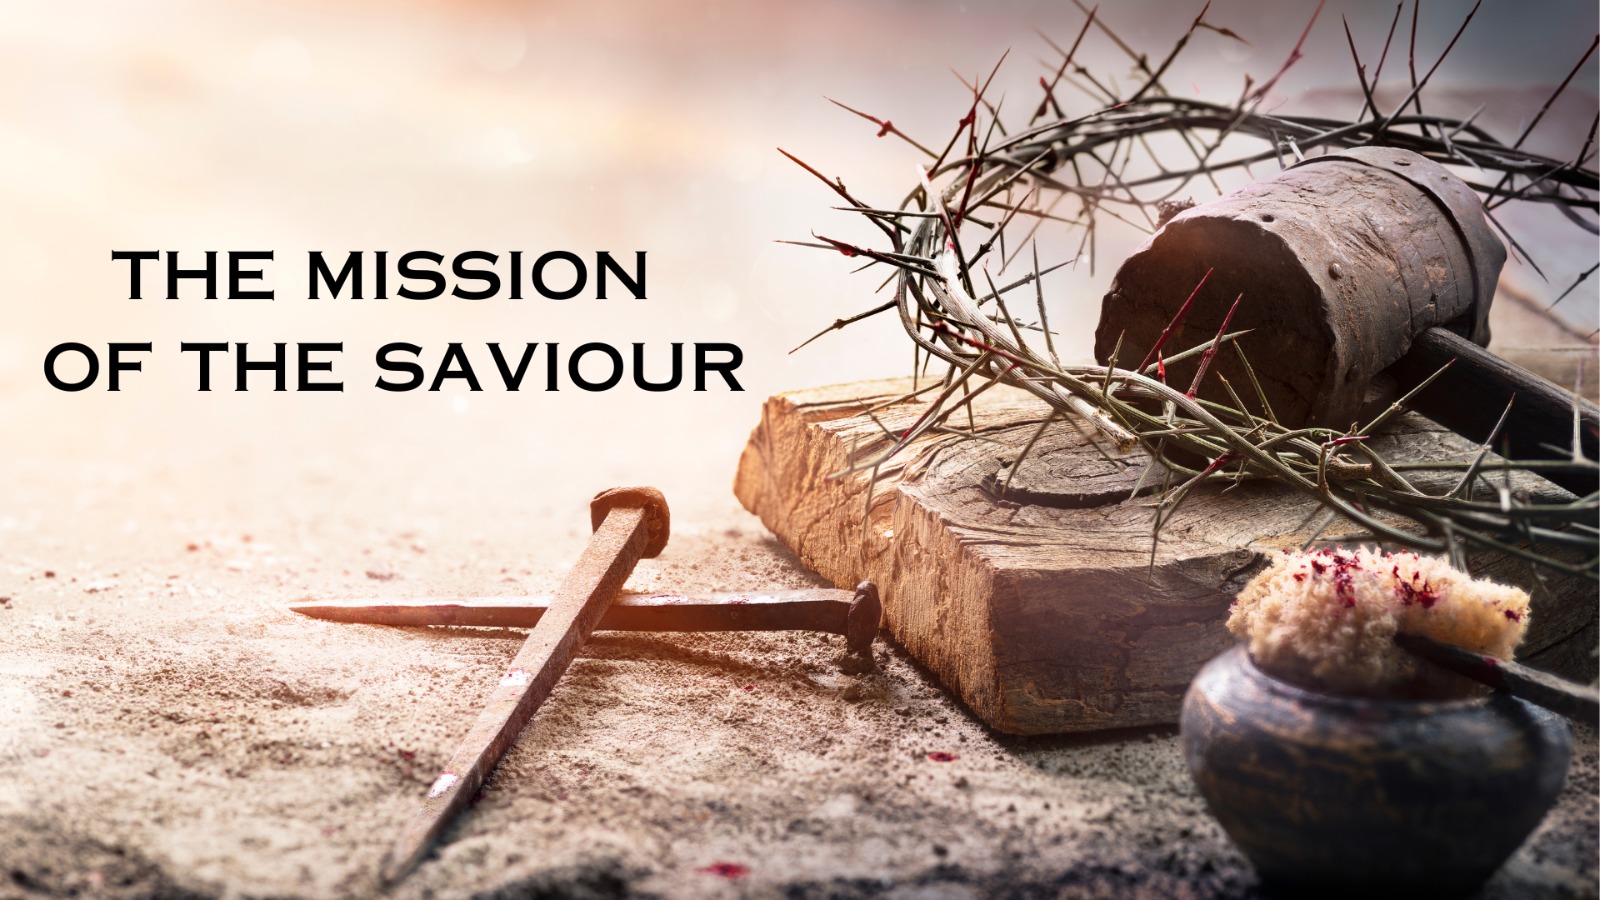 The mission of the Saviour